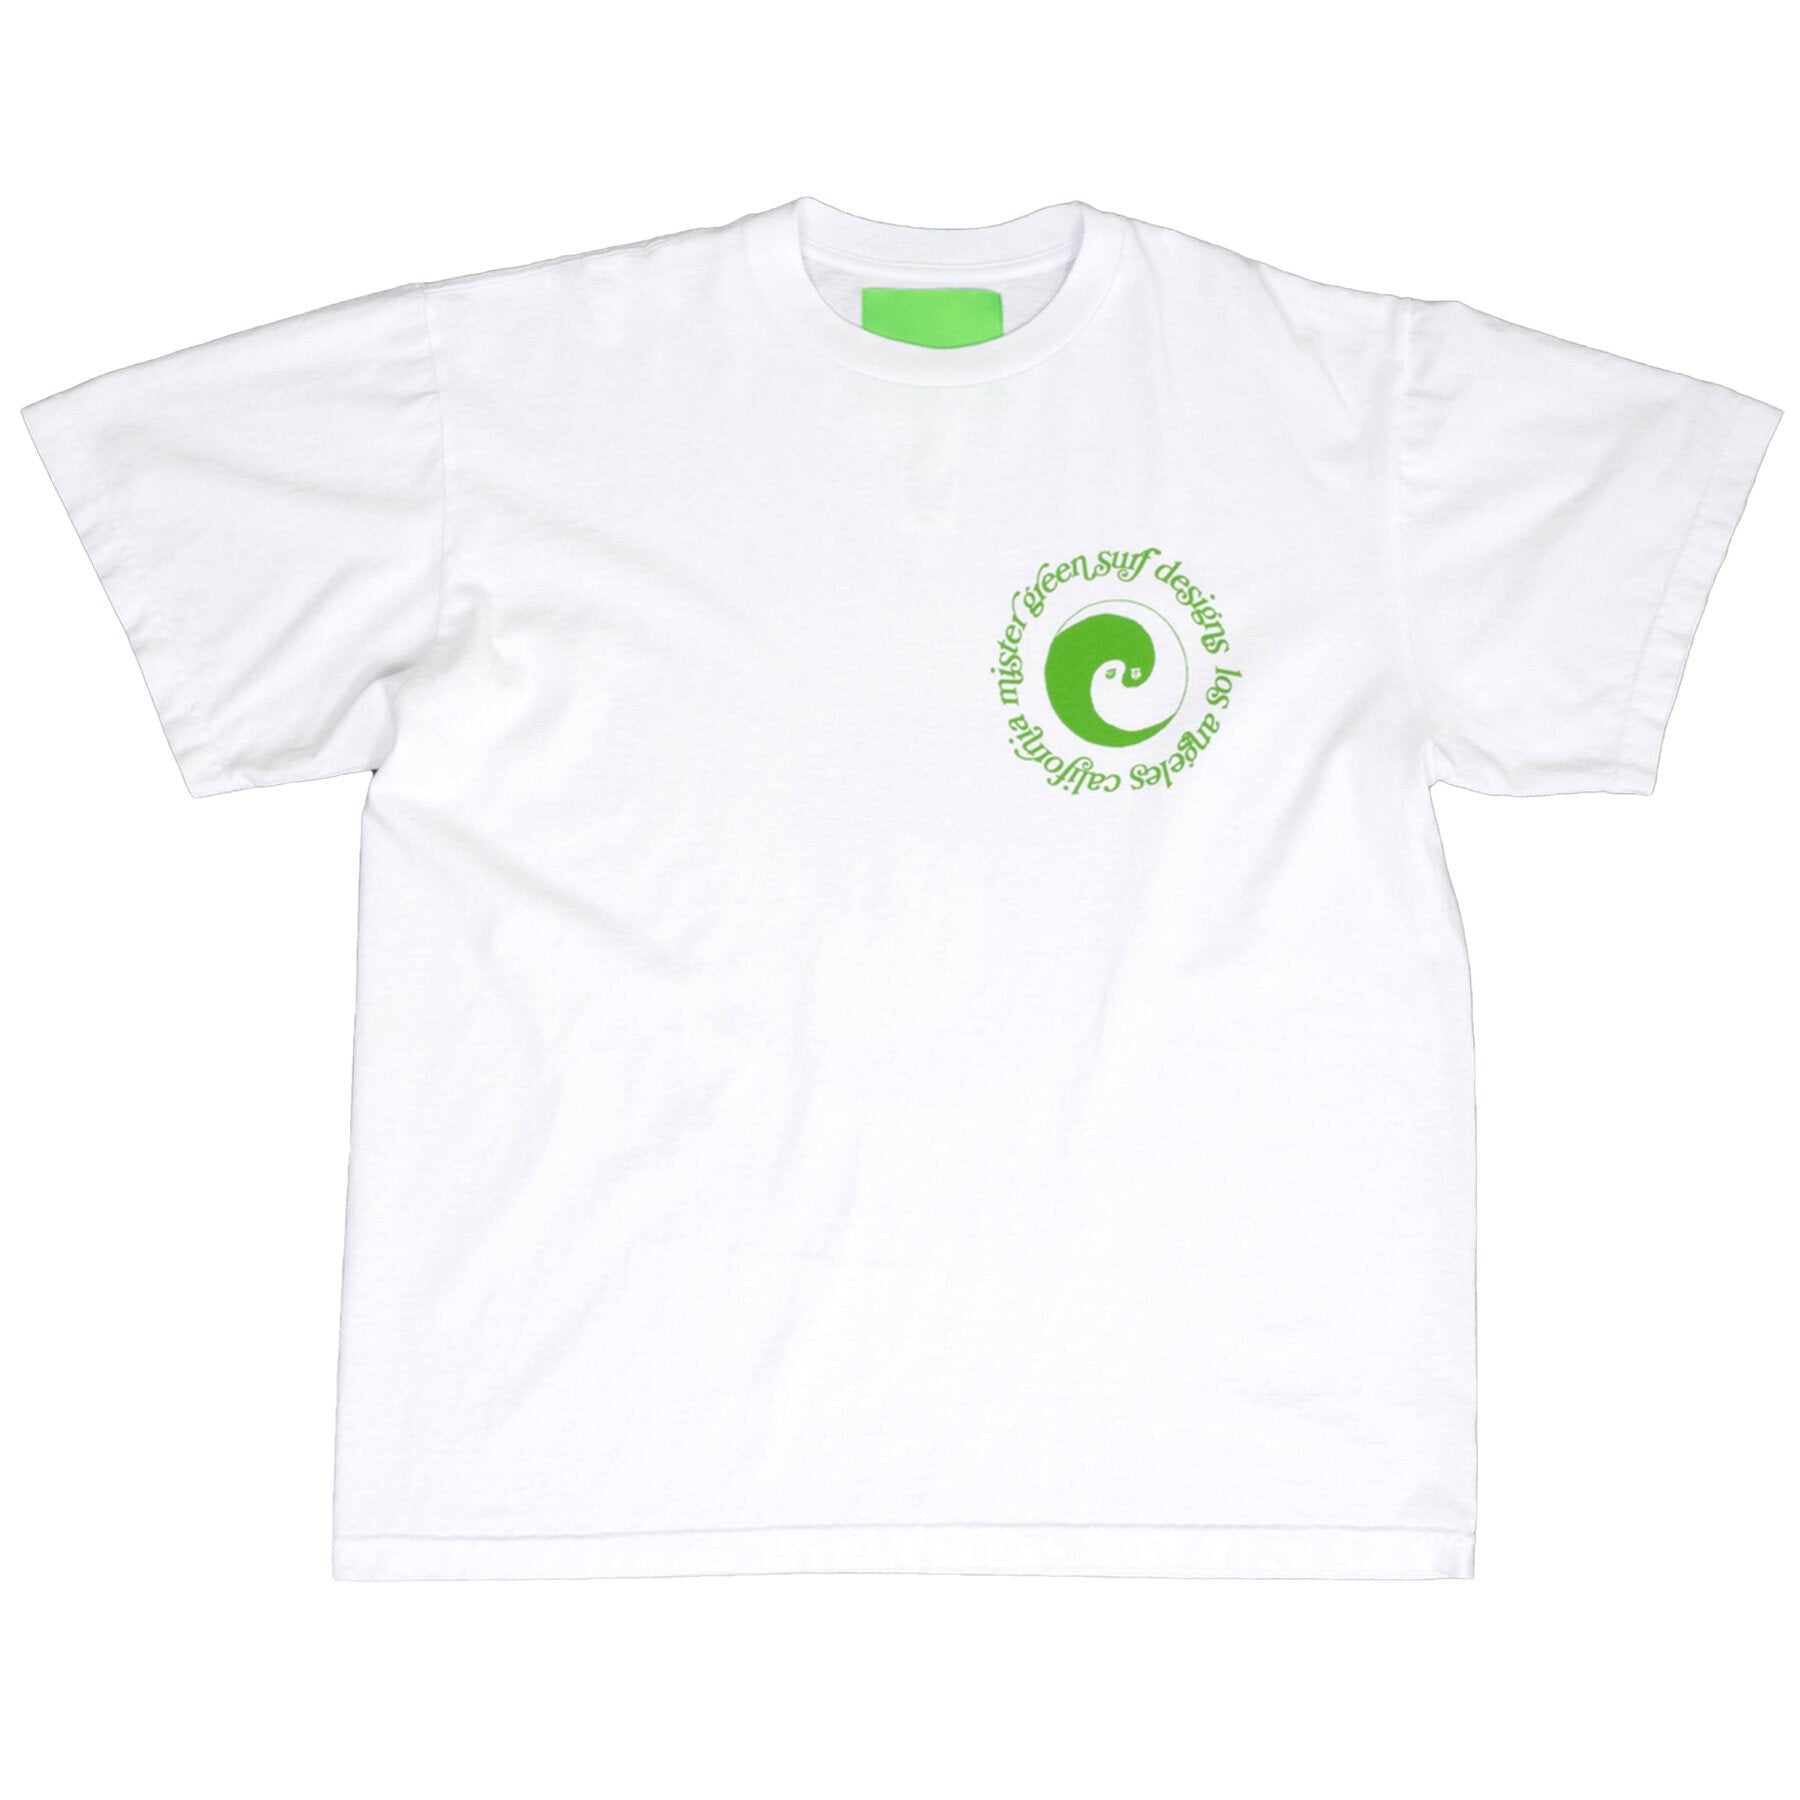 Dualism Surf Tee - White-Mister Green-Mister Green